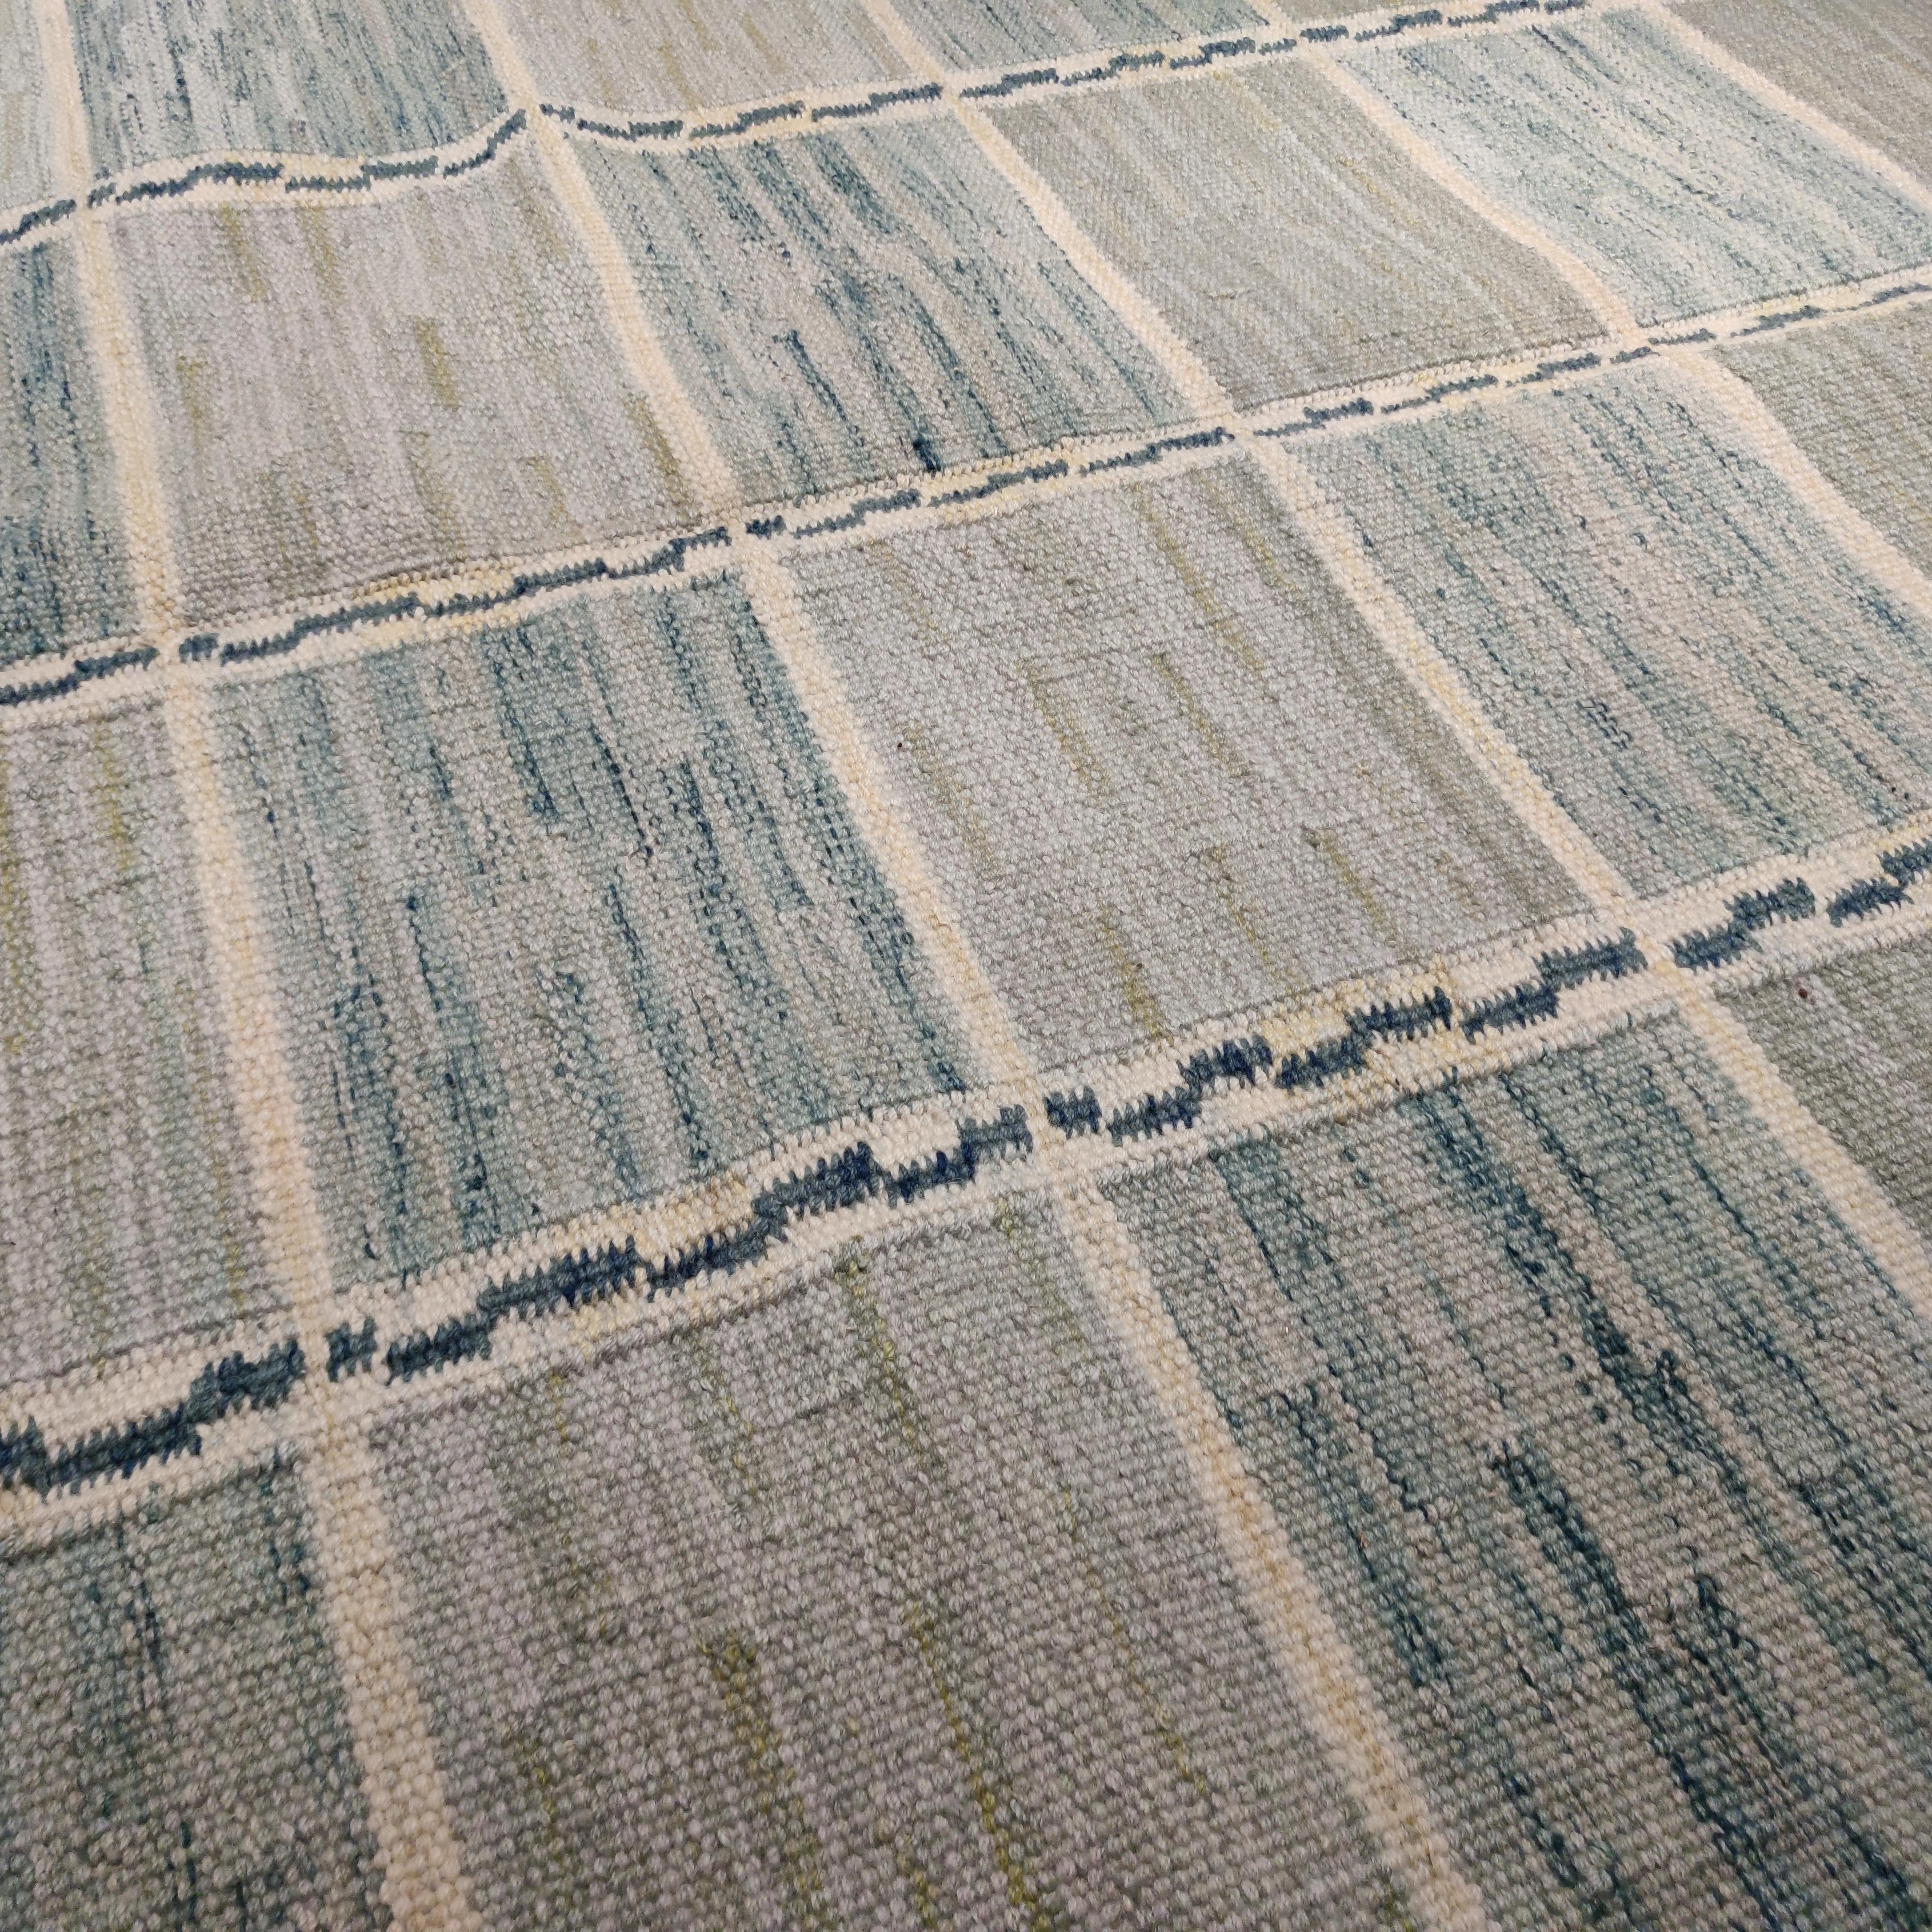 Inspired by Mid-Century Modern Swedish carpets, this Kilim is part of our contemporary collection of textured flat weaves where the material is employed in such a way as to create a sturdy rug that can be beautifully juxtaposed in today's interiors.